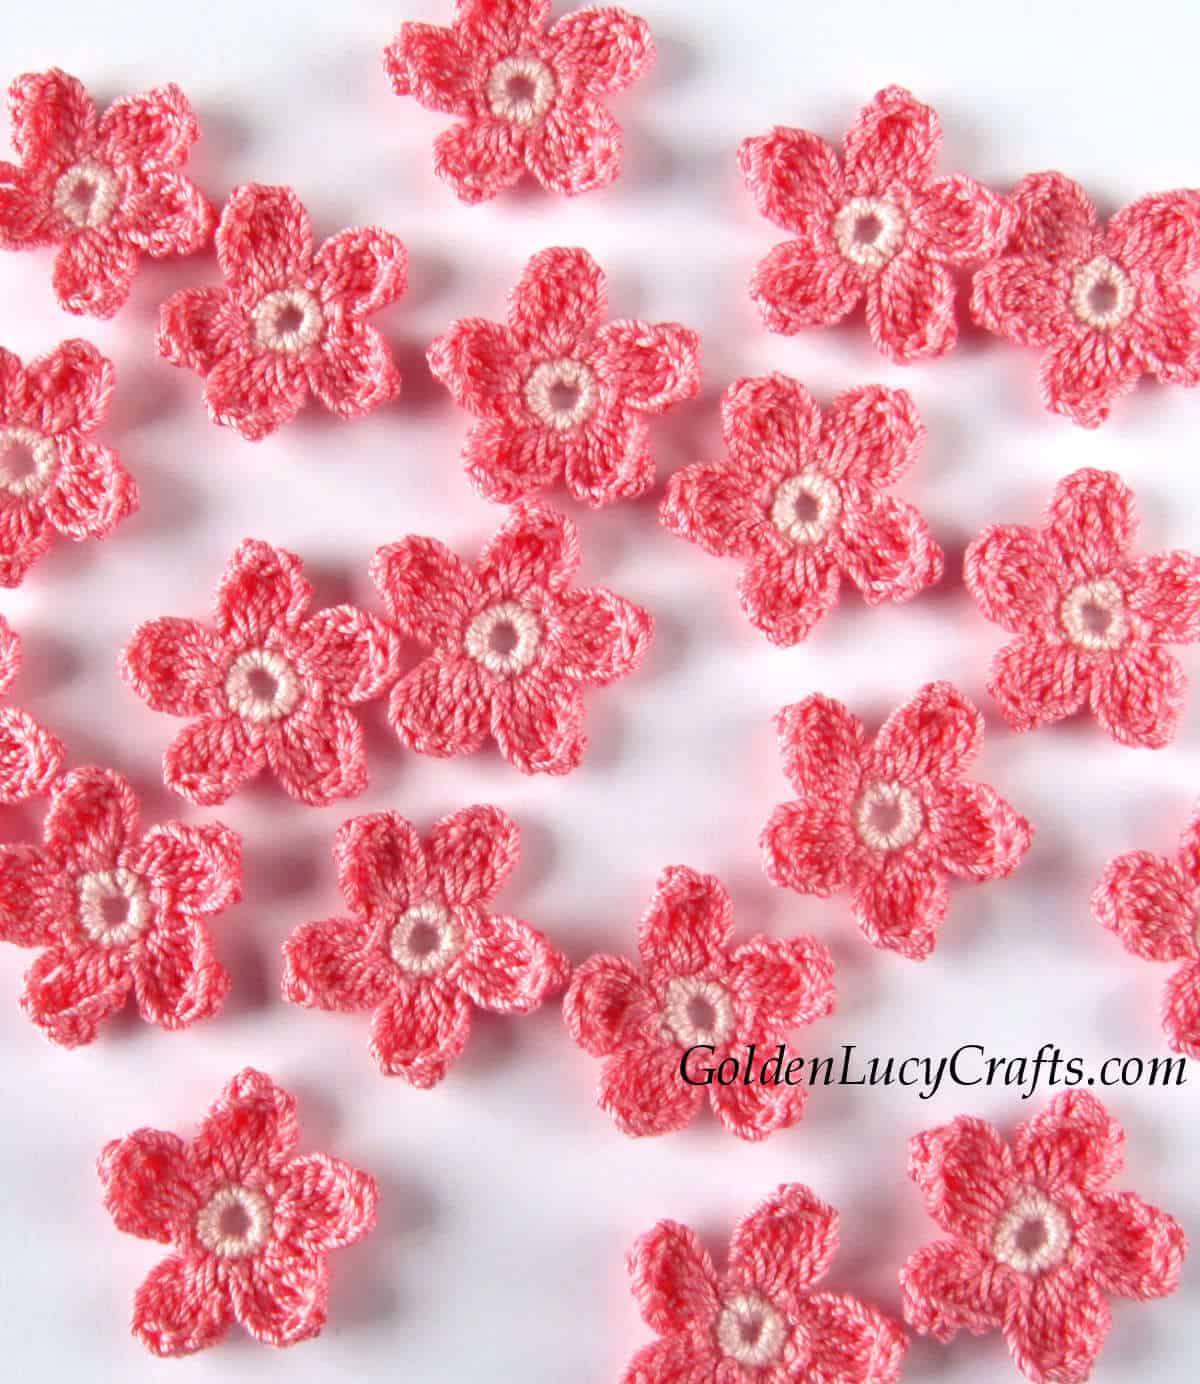 Crocheted small flowers in coral pink color.